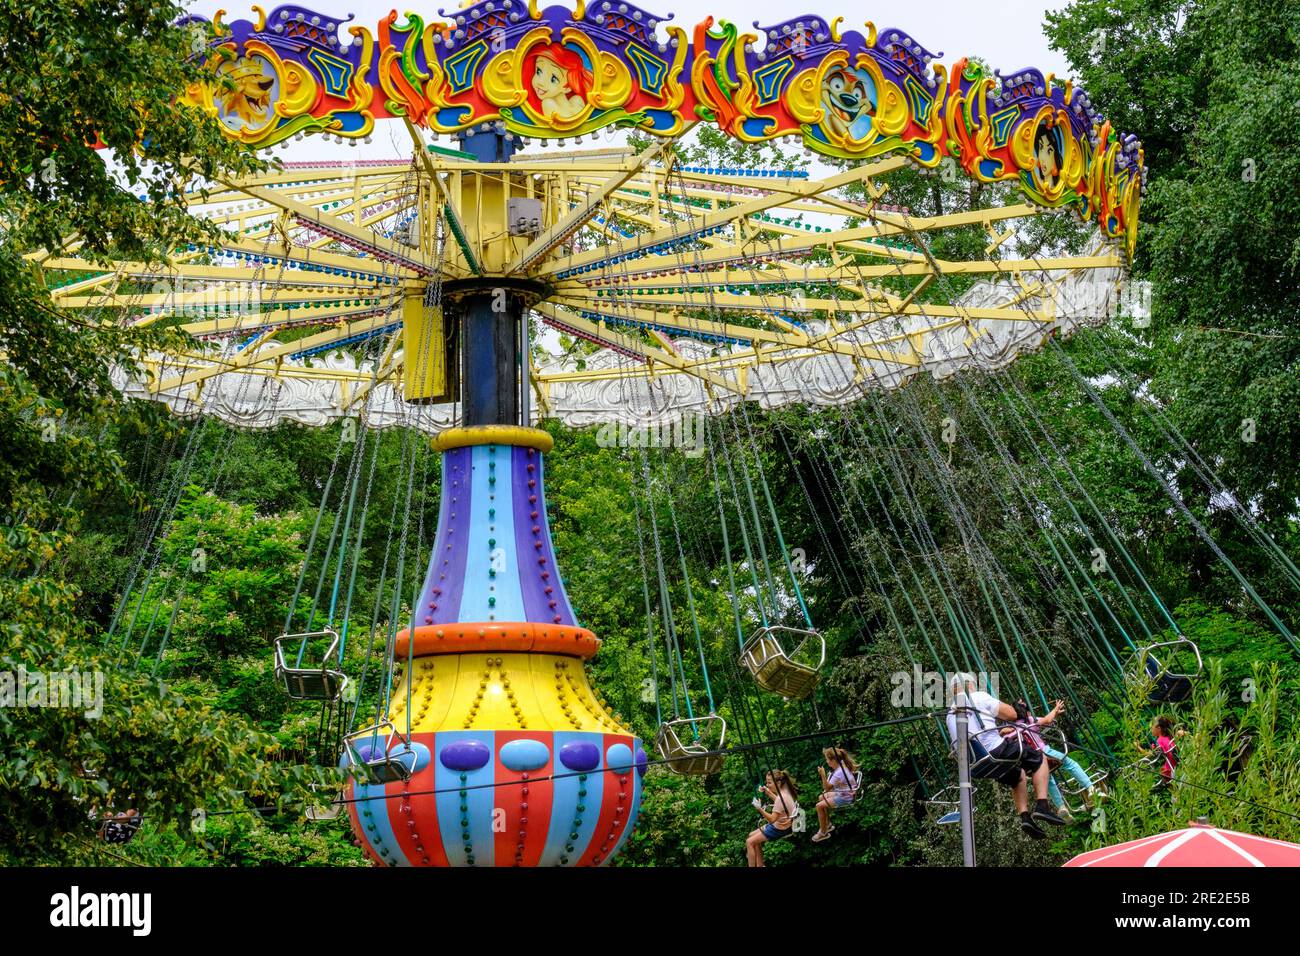 Kazakhstan, Almaty. People on Amusement Park Ride, Central Park for Culture and Recreation. Stock Photo